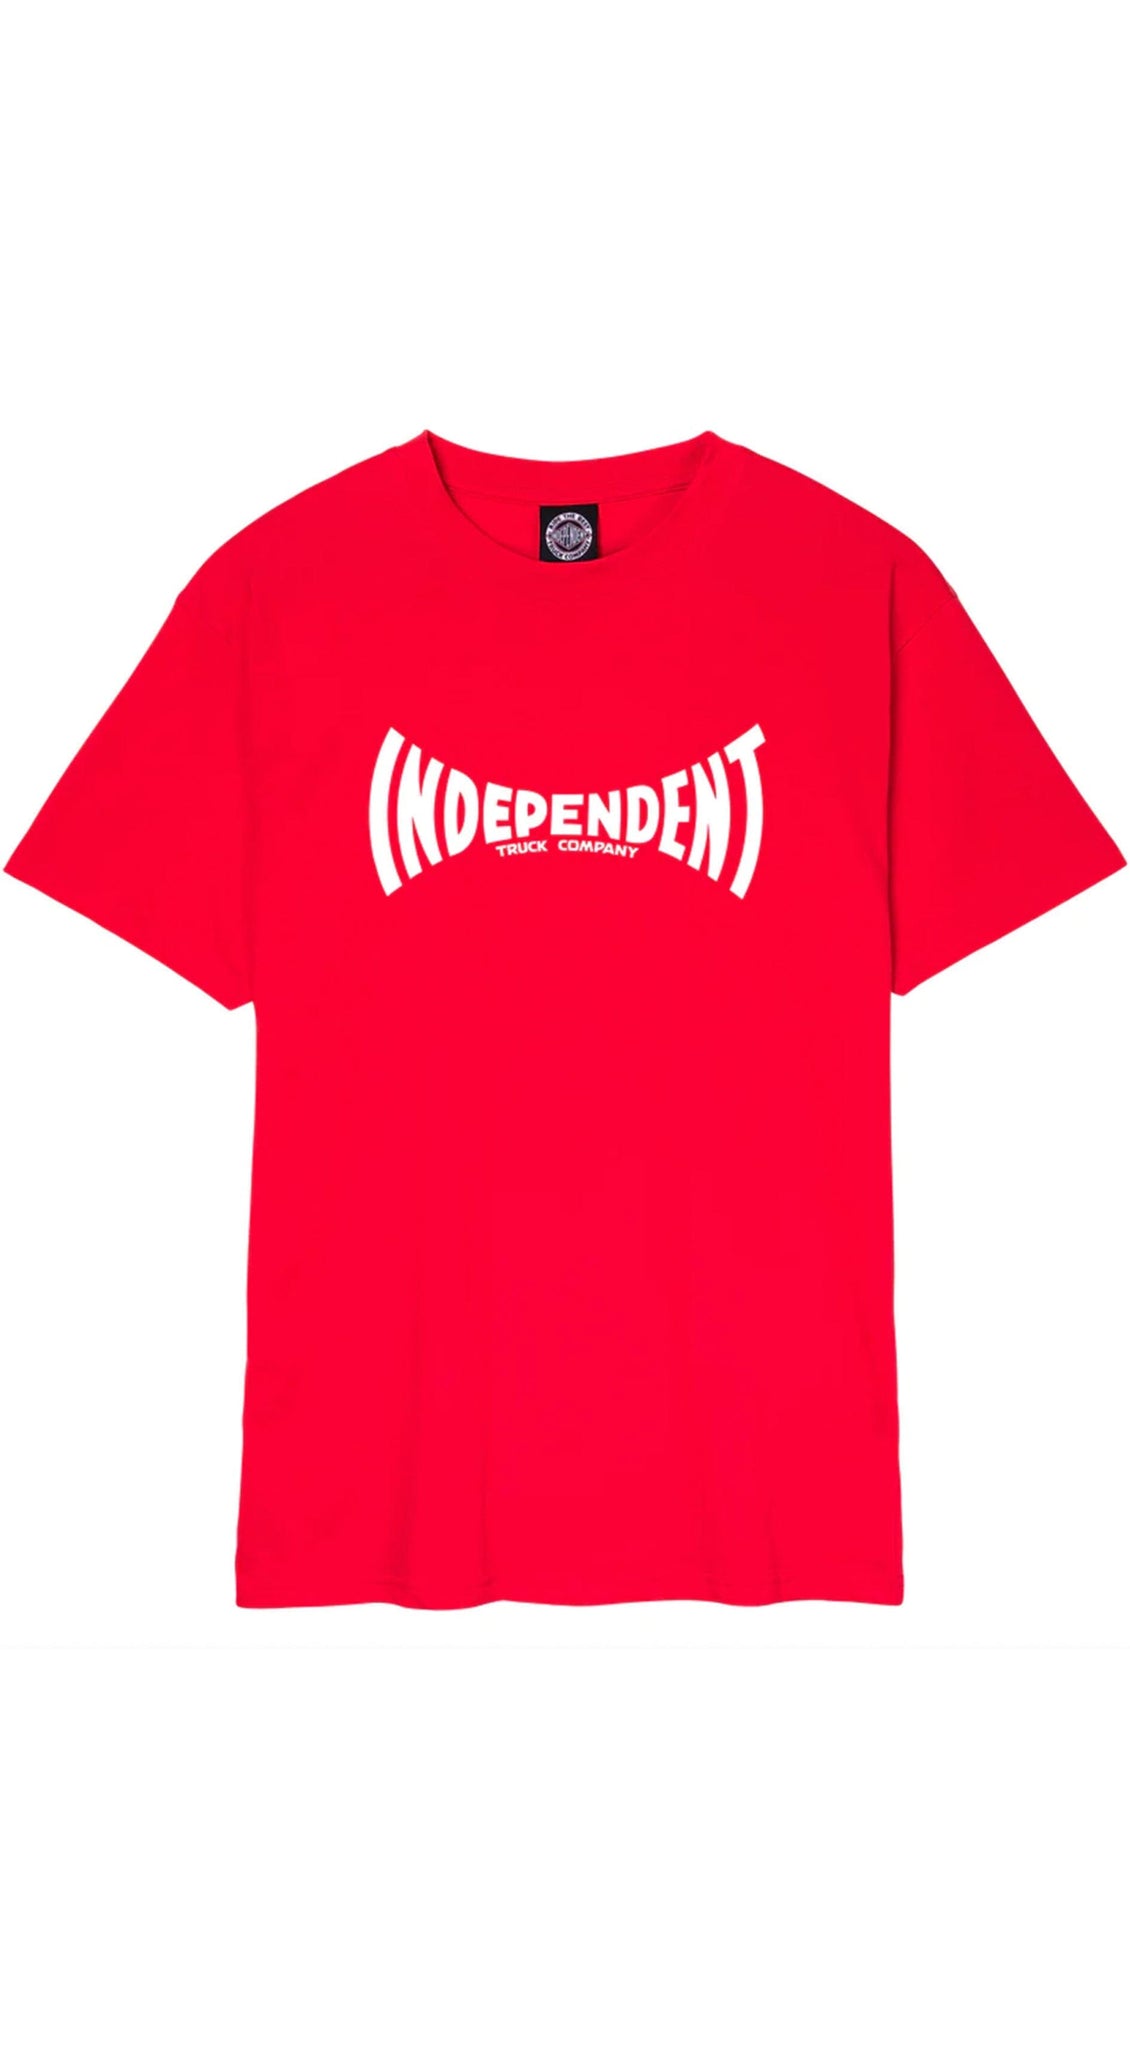 Independent Tee Span Logo Red T-shirt - Camiseta Ropa Independent 